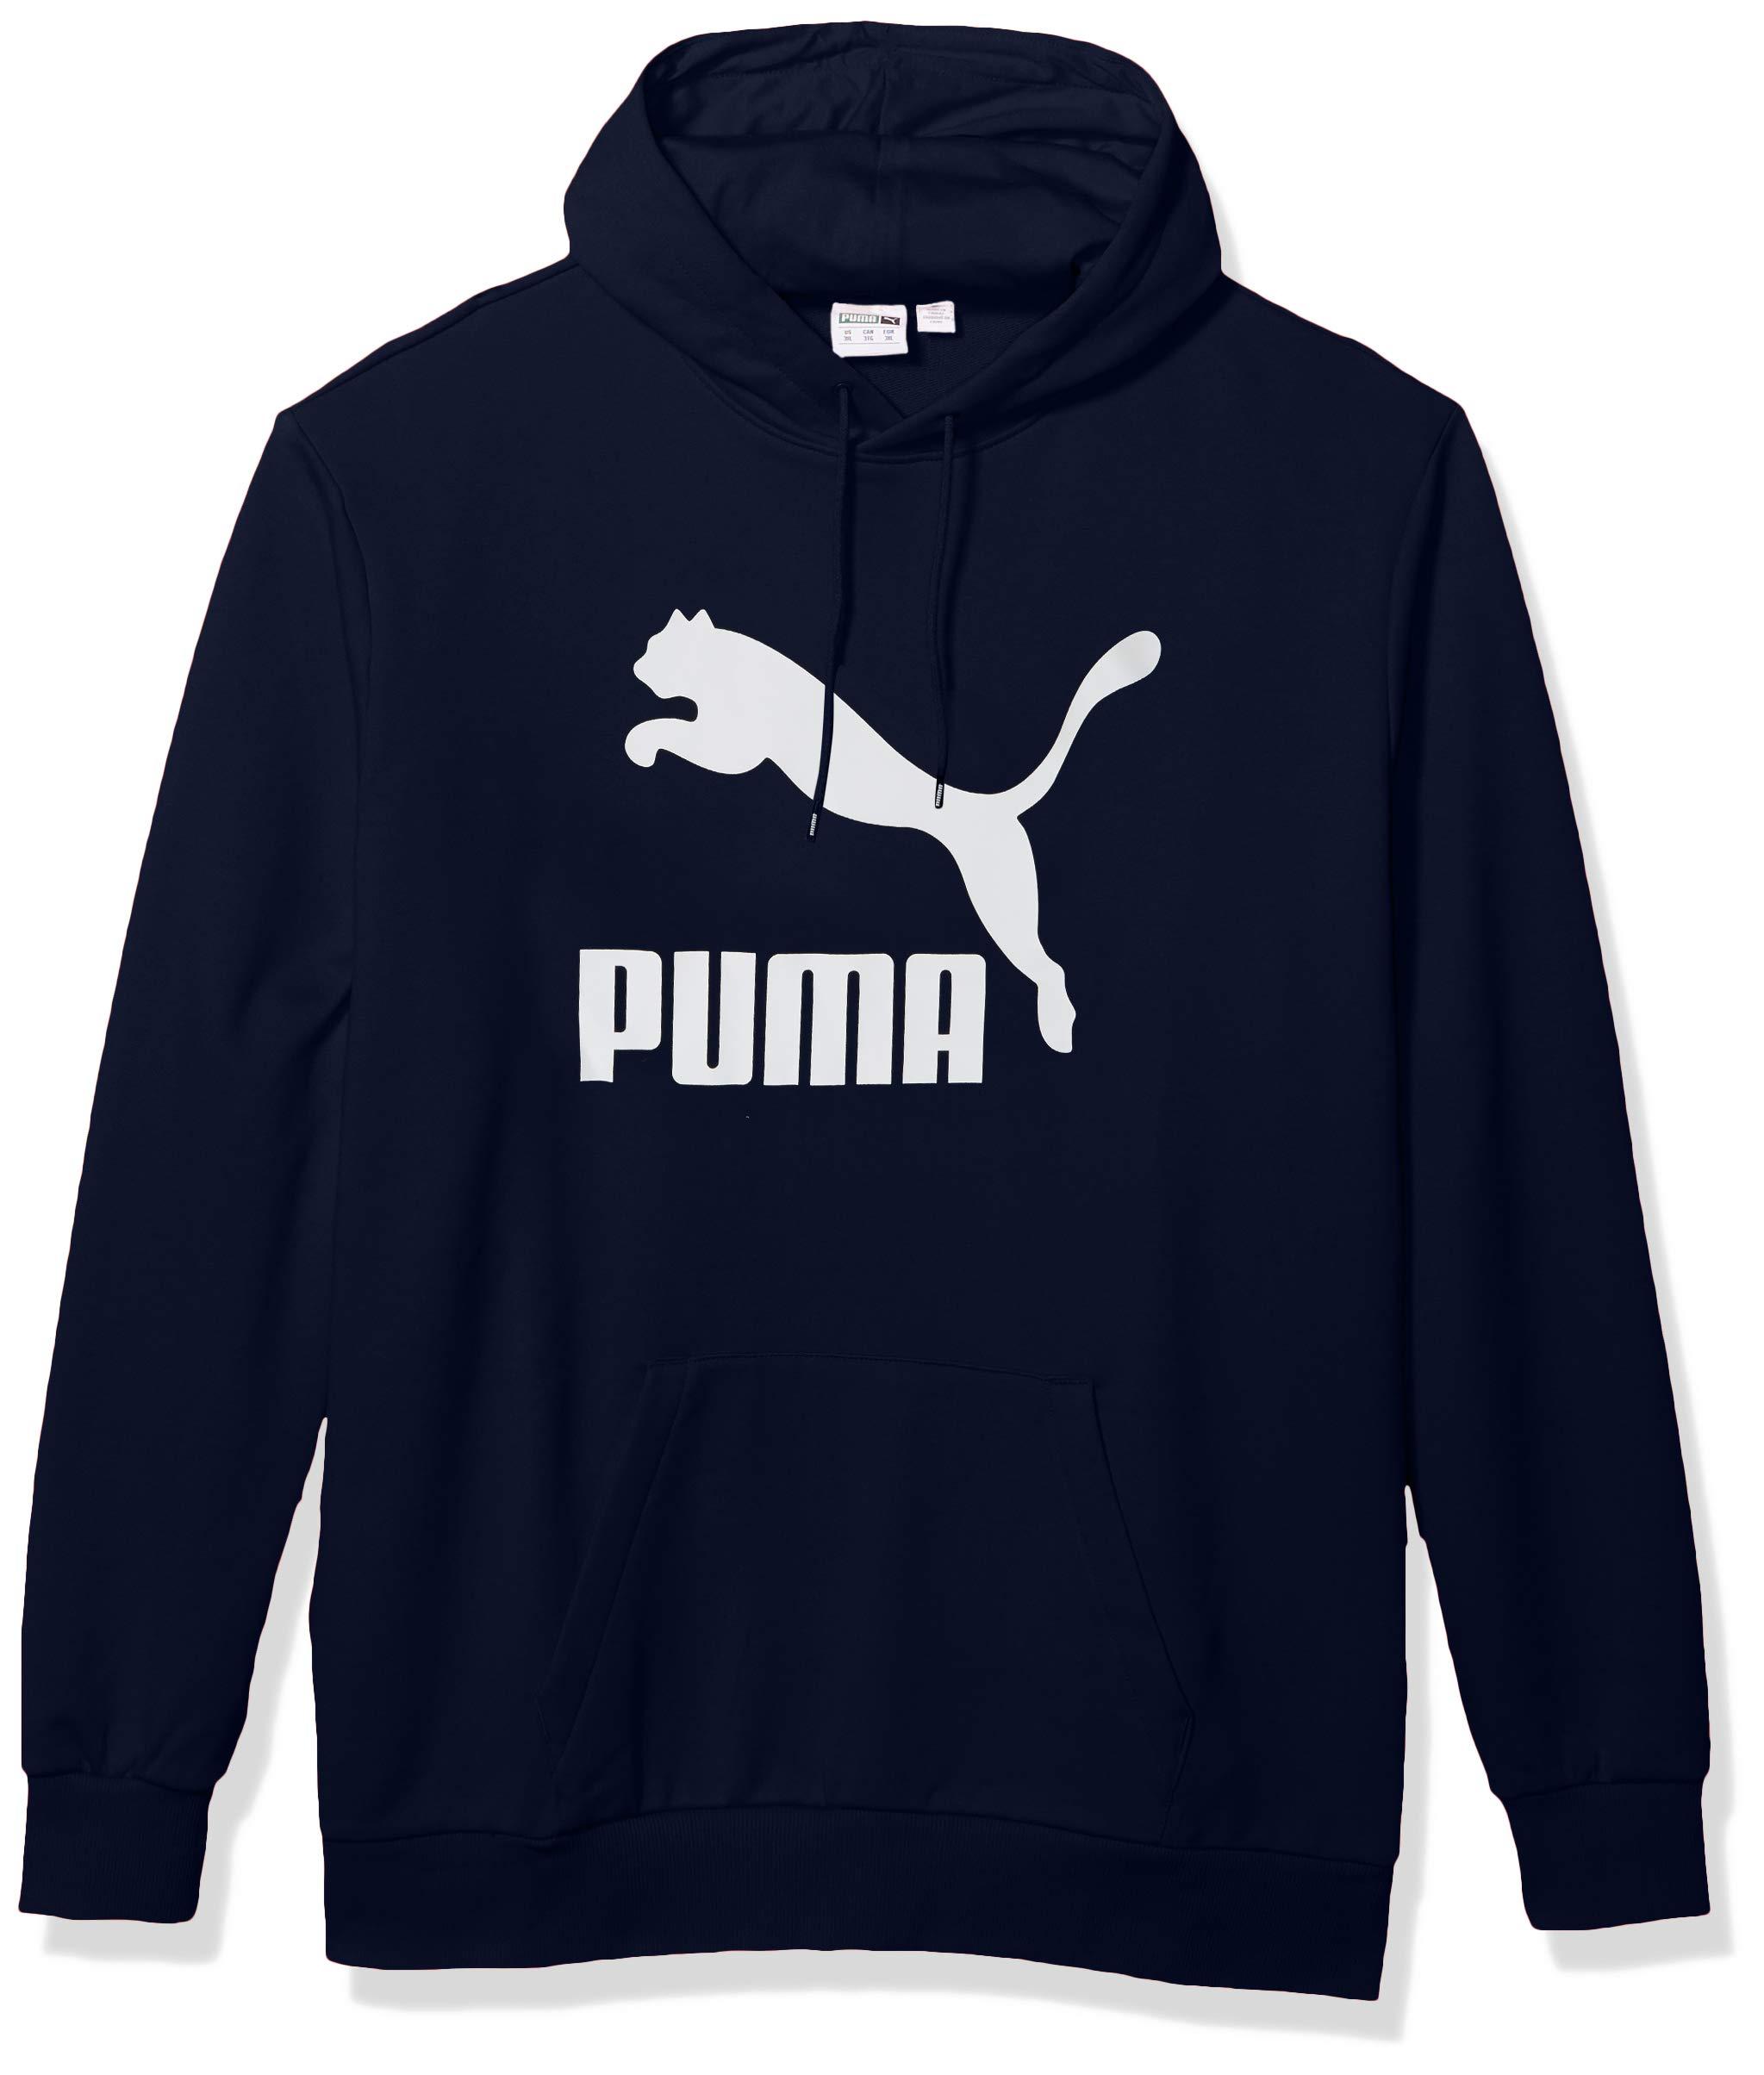 PUMA Cotton Classics Logo Hoodie in Blue for Men - Save 47% - Lyst